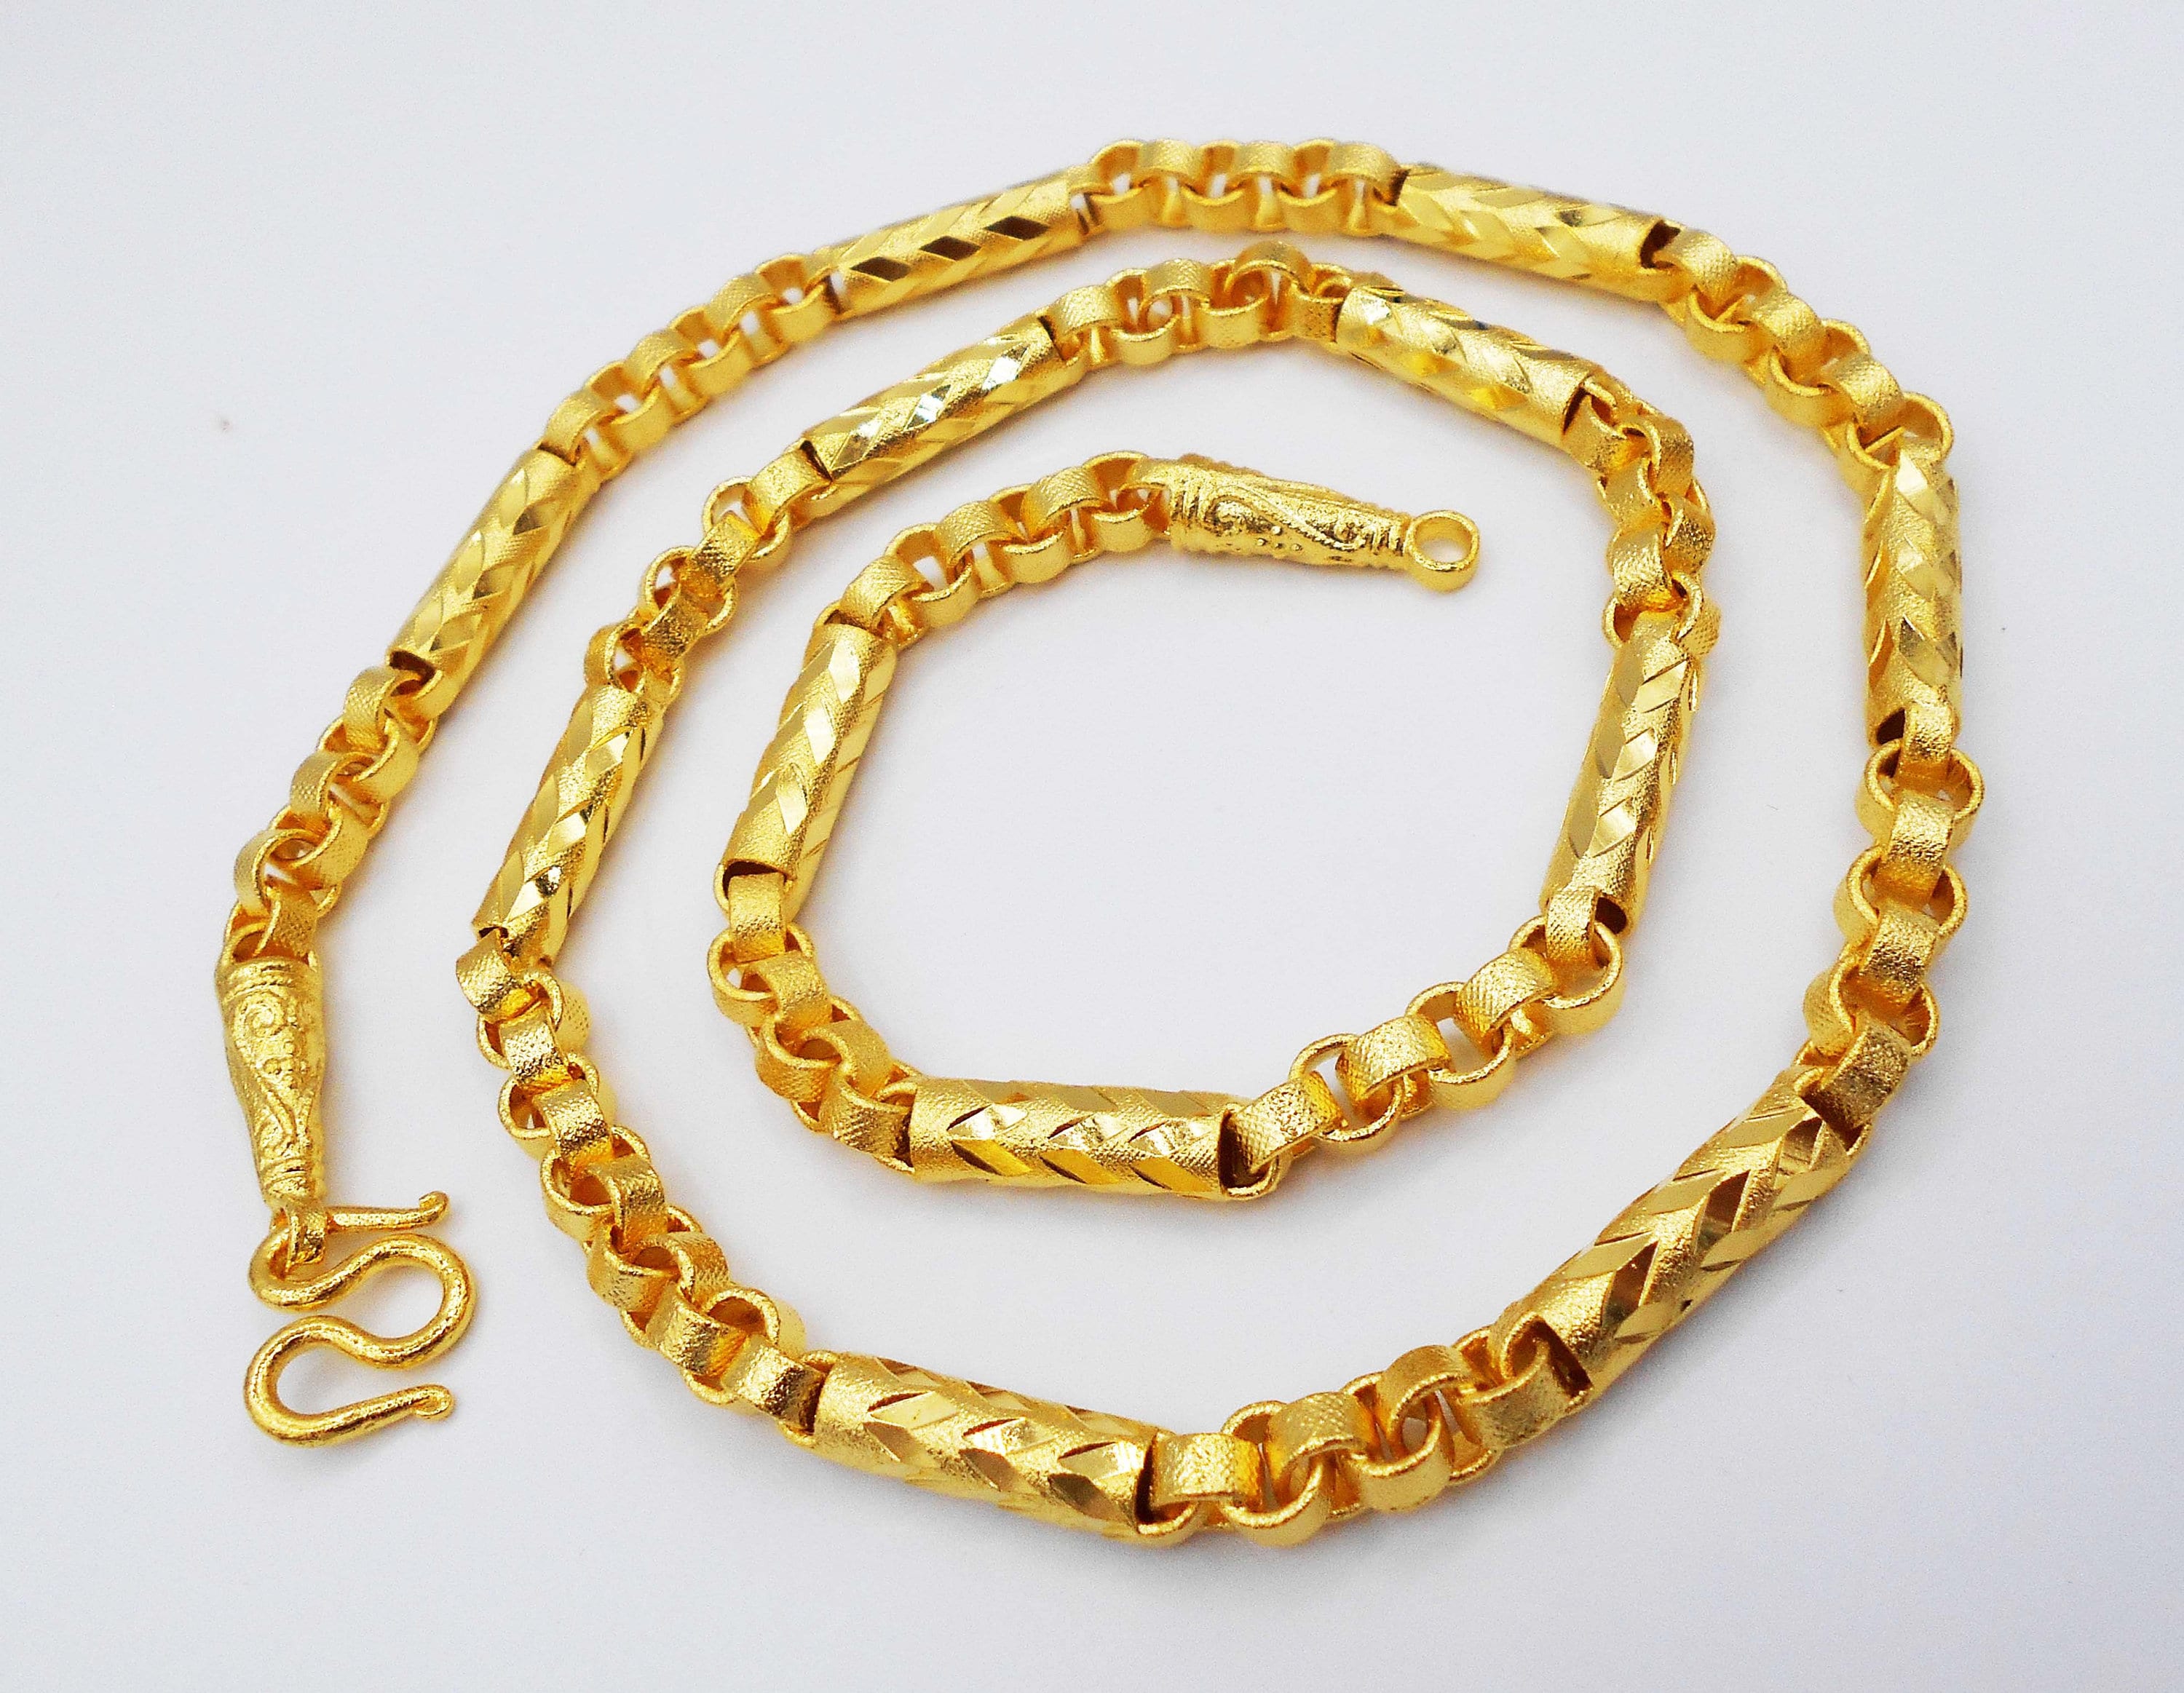 Braid Necklace 23K 24K Thai Baht Yellow Gold GP Filled  33 Gram 20 inch Jewelry 